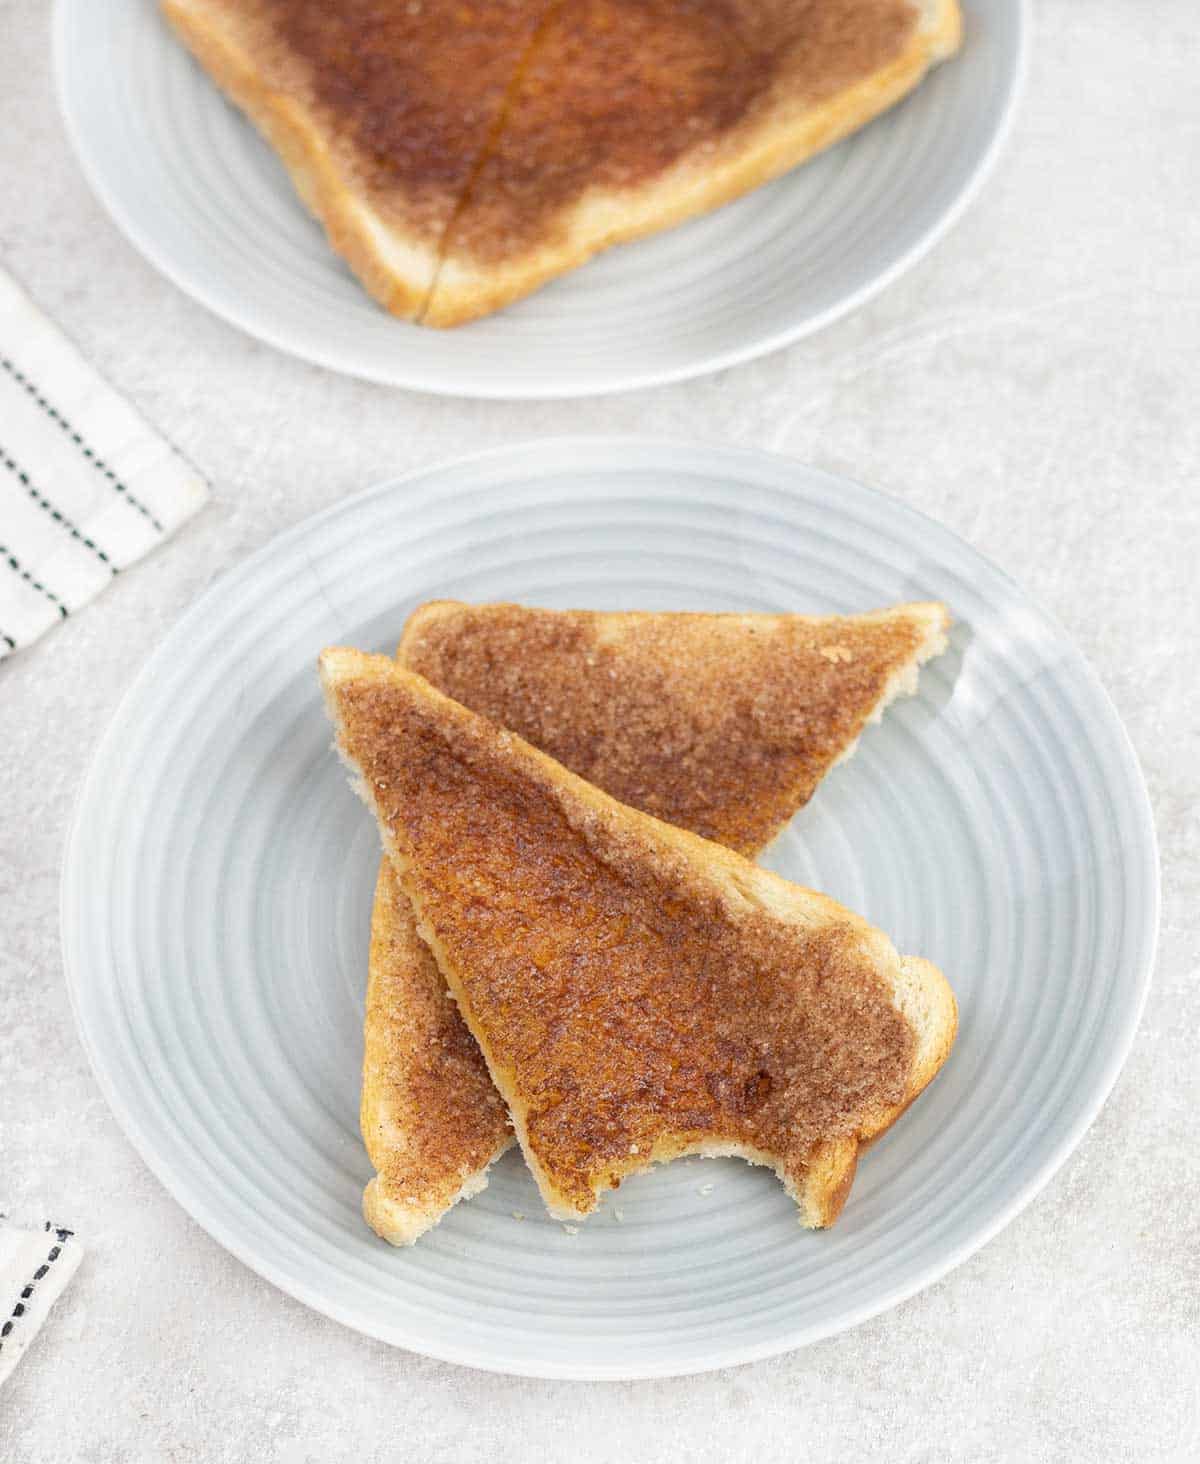 Cinnamon Toast in a plate